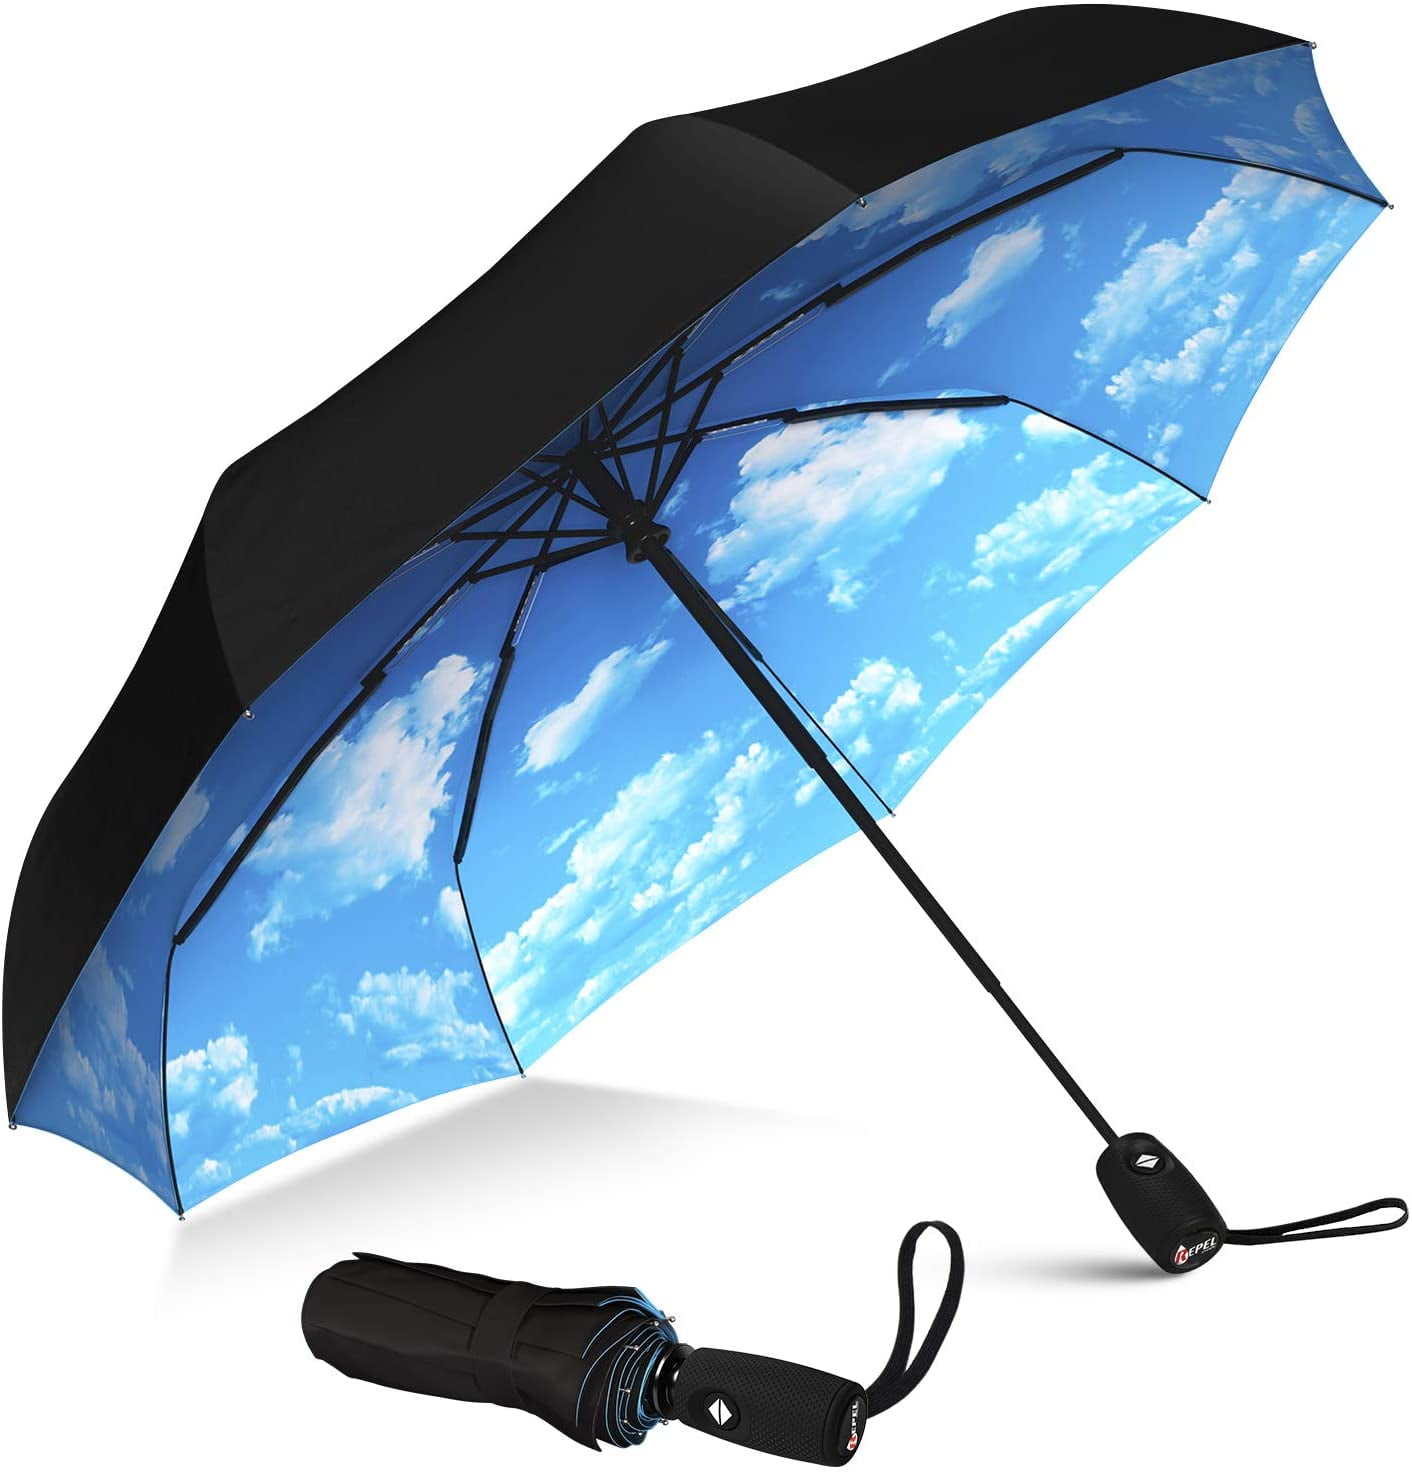 MINI COMPACT UMBRELLA AUTOMATIC FOLDING WINDPROOF STRONG TRAVEL FOR MENS LADIES 